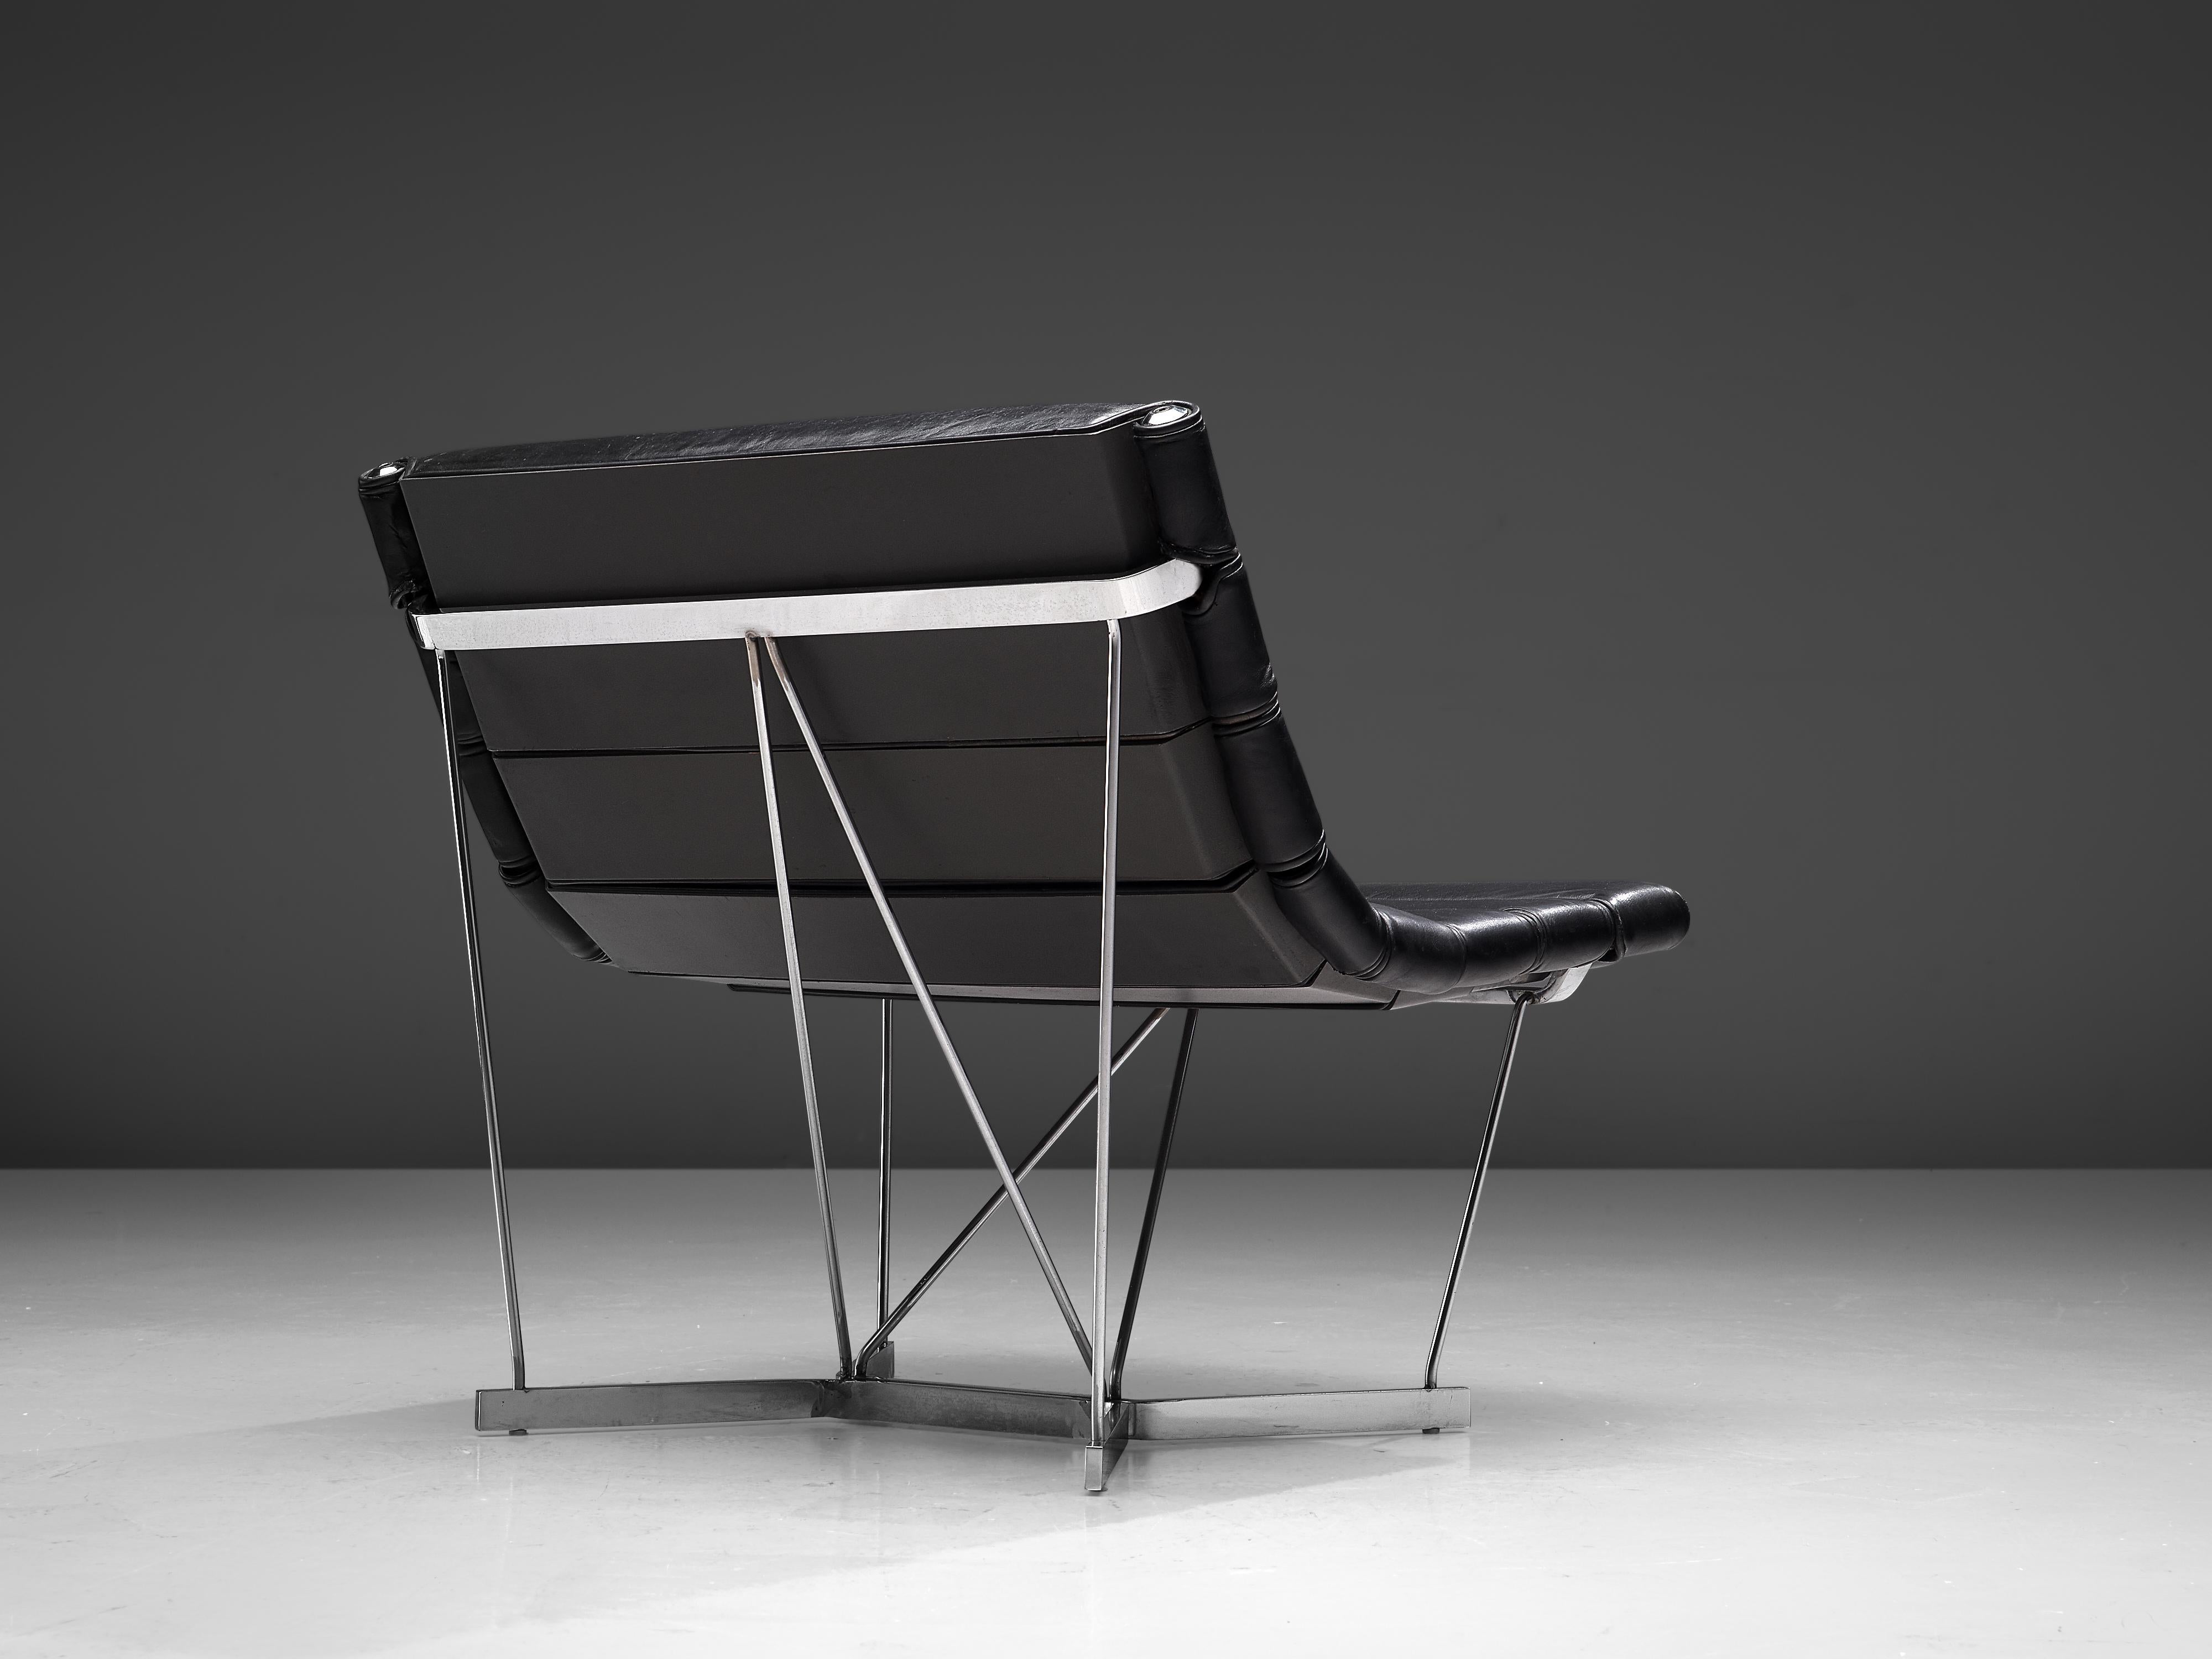 George Nelson & Associates for Herman Miller, 'Catenary' lounge chair model 6380, steel and leather, United States, 1962.
 
Model 6380 or the Catenary chair by George Nelson & Associates from 1962. The special chromed steel construction of this easy